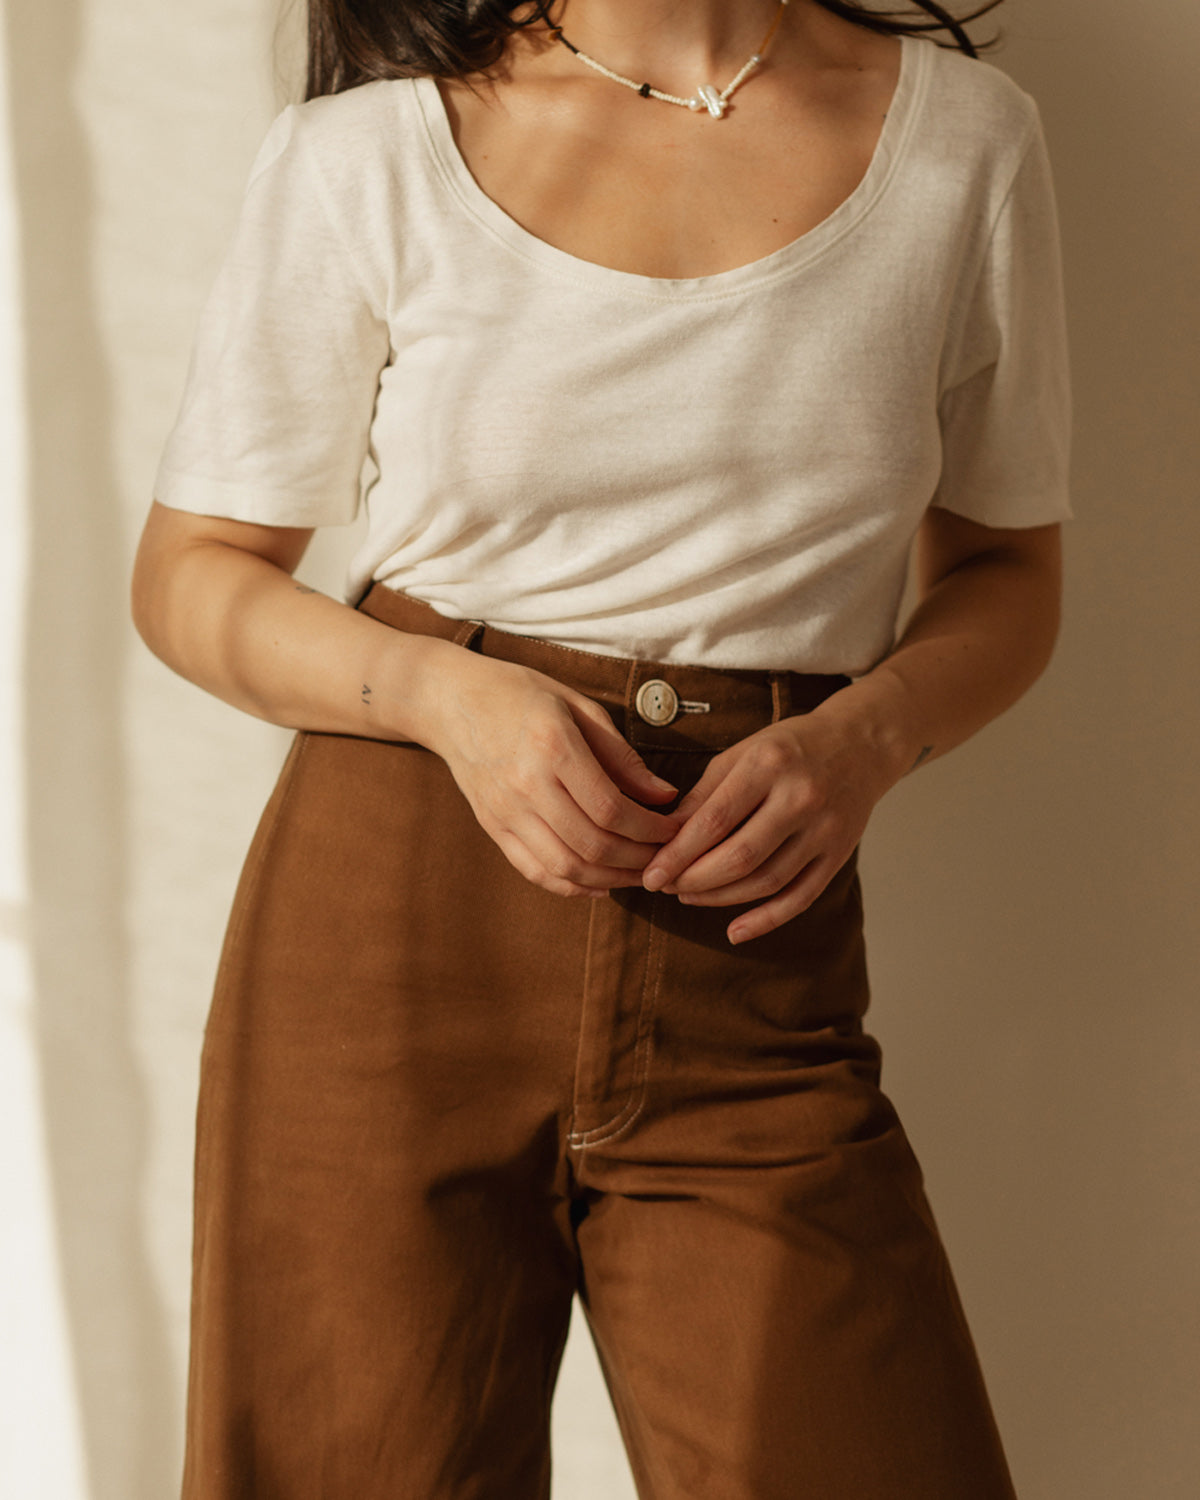 For the ultimate cool girl vibe! Based on Harly Jae's bestselling, form-fitting Pierrot Pants, this new style features a higher waist, unique back pockets, and cool contrast stitching - for a true ode to the 70s era. Handmade with organic cotton blend in Vancouver, BC.